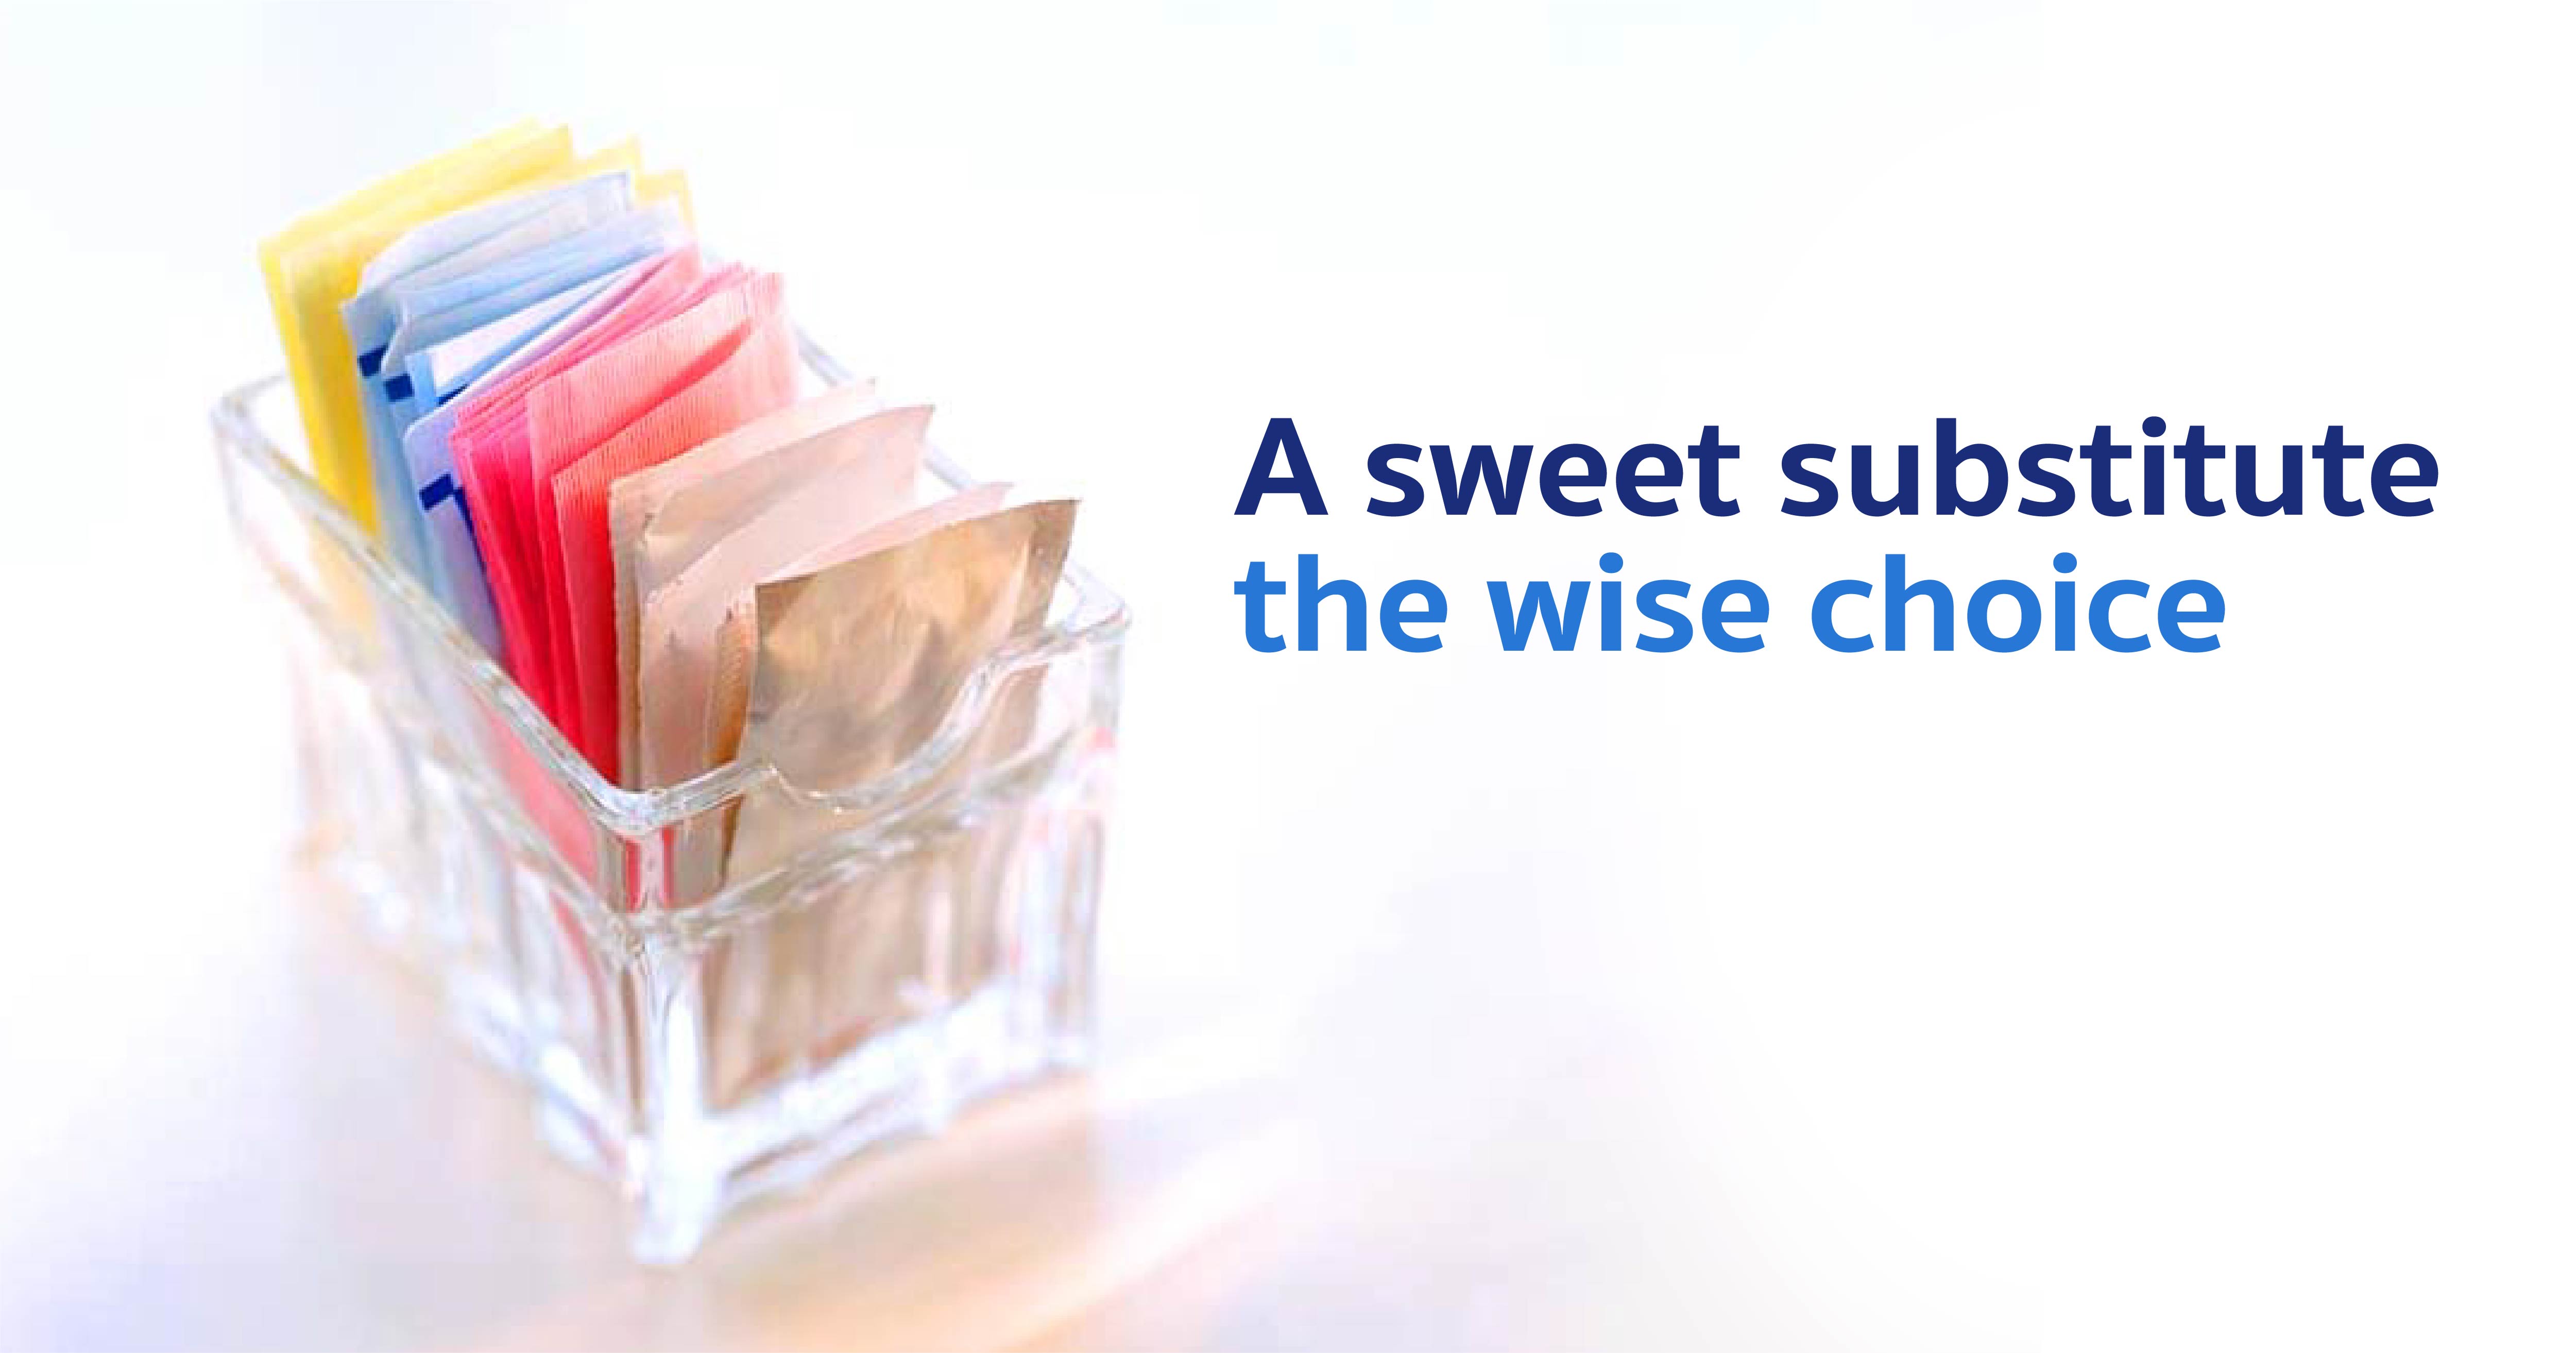 A sweet substitute—the wise choice